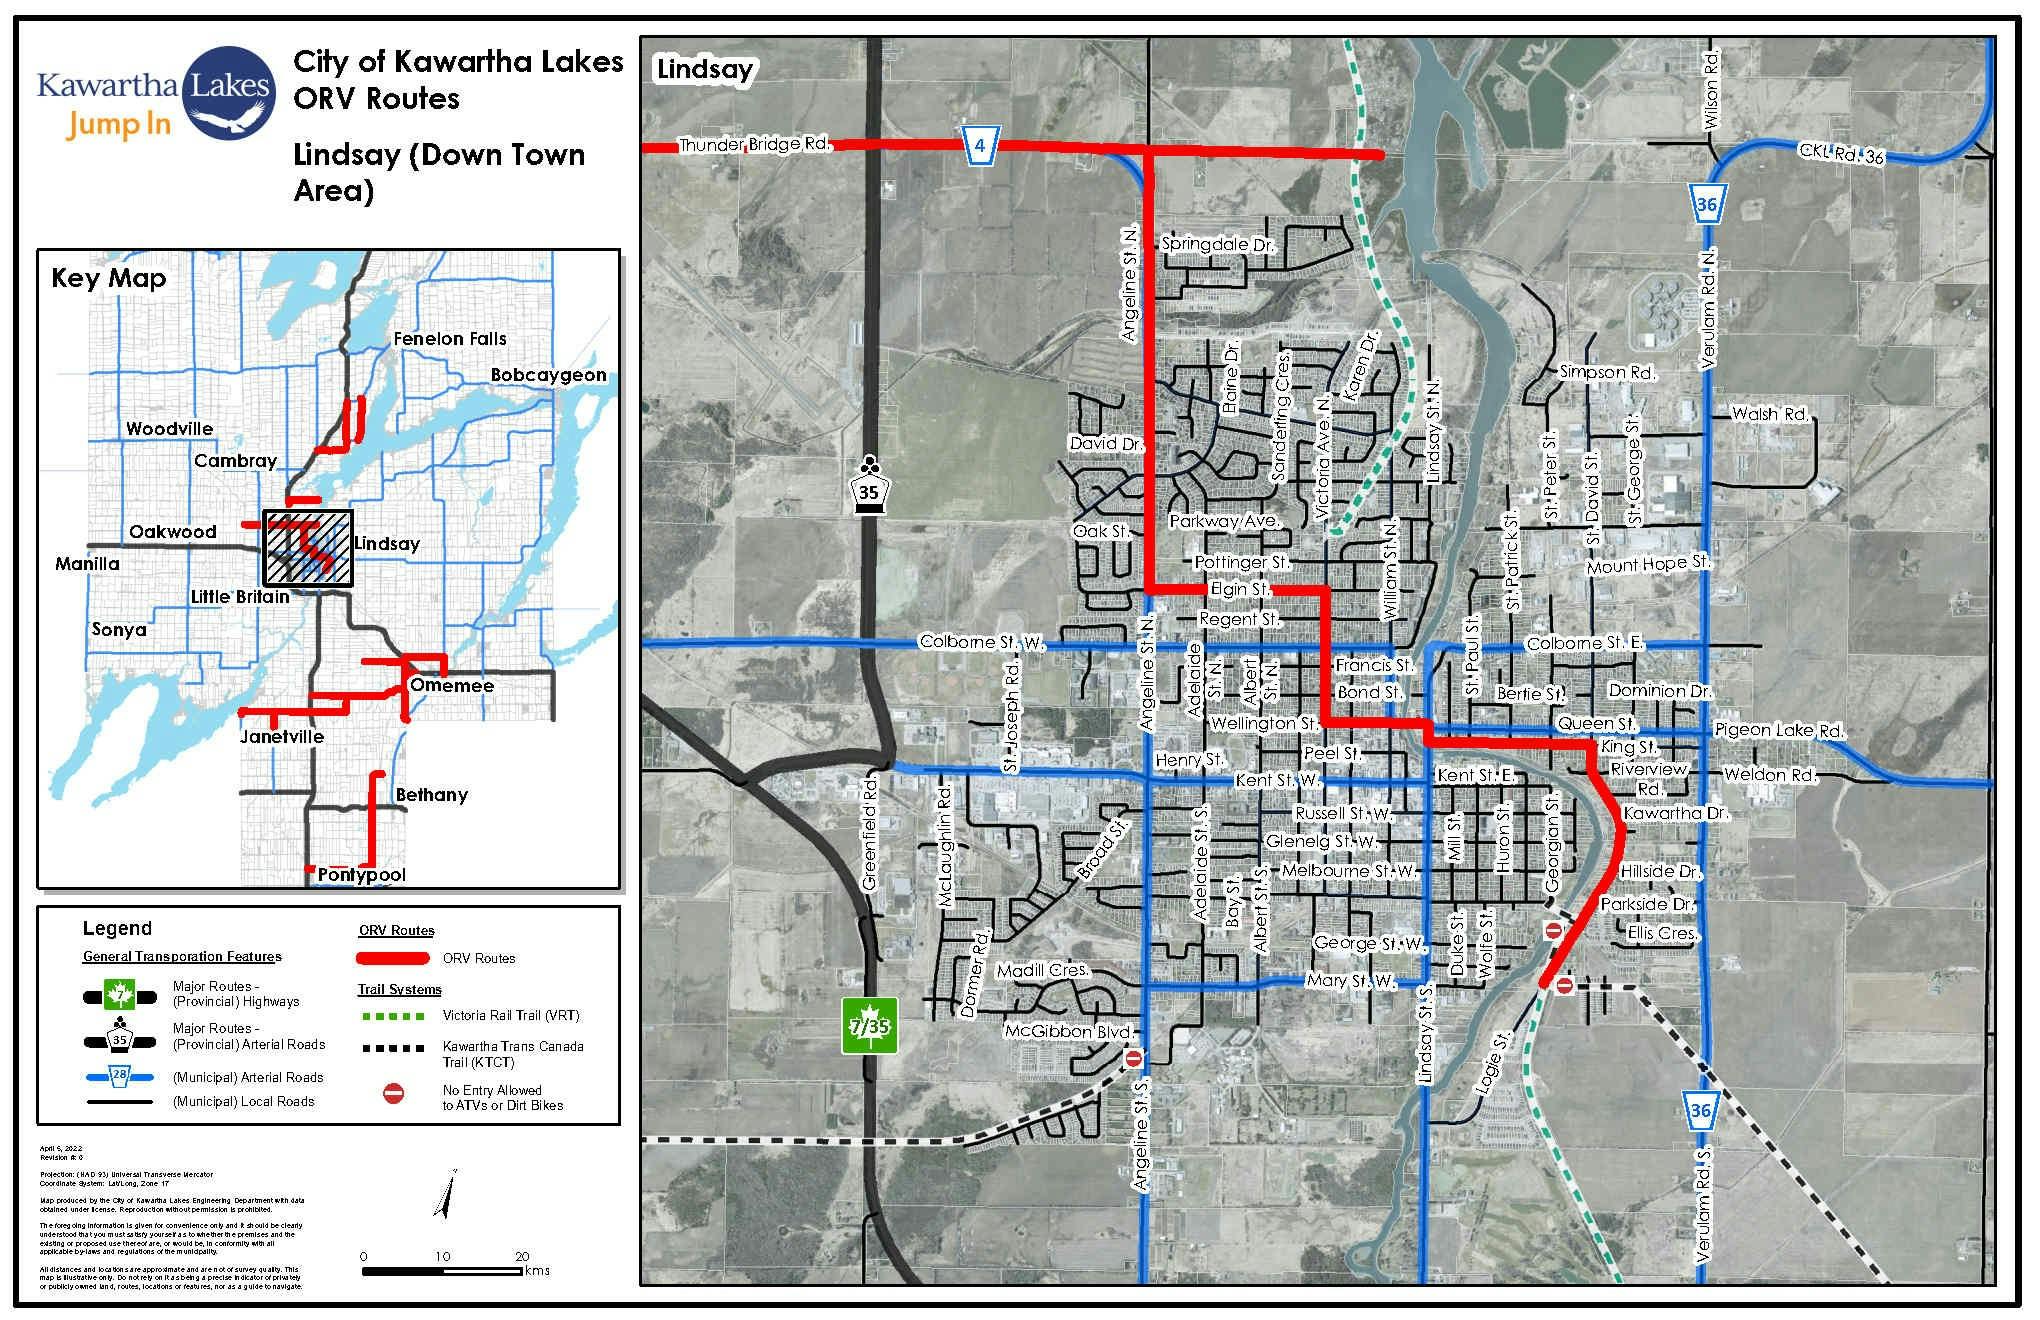 Approved Route Lindsay Downtown.jpg